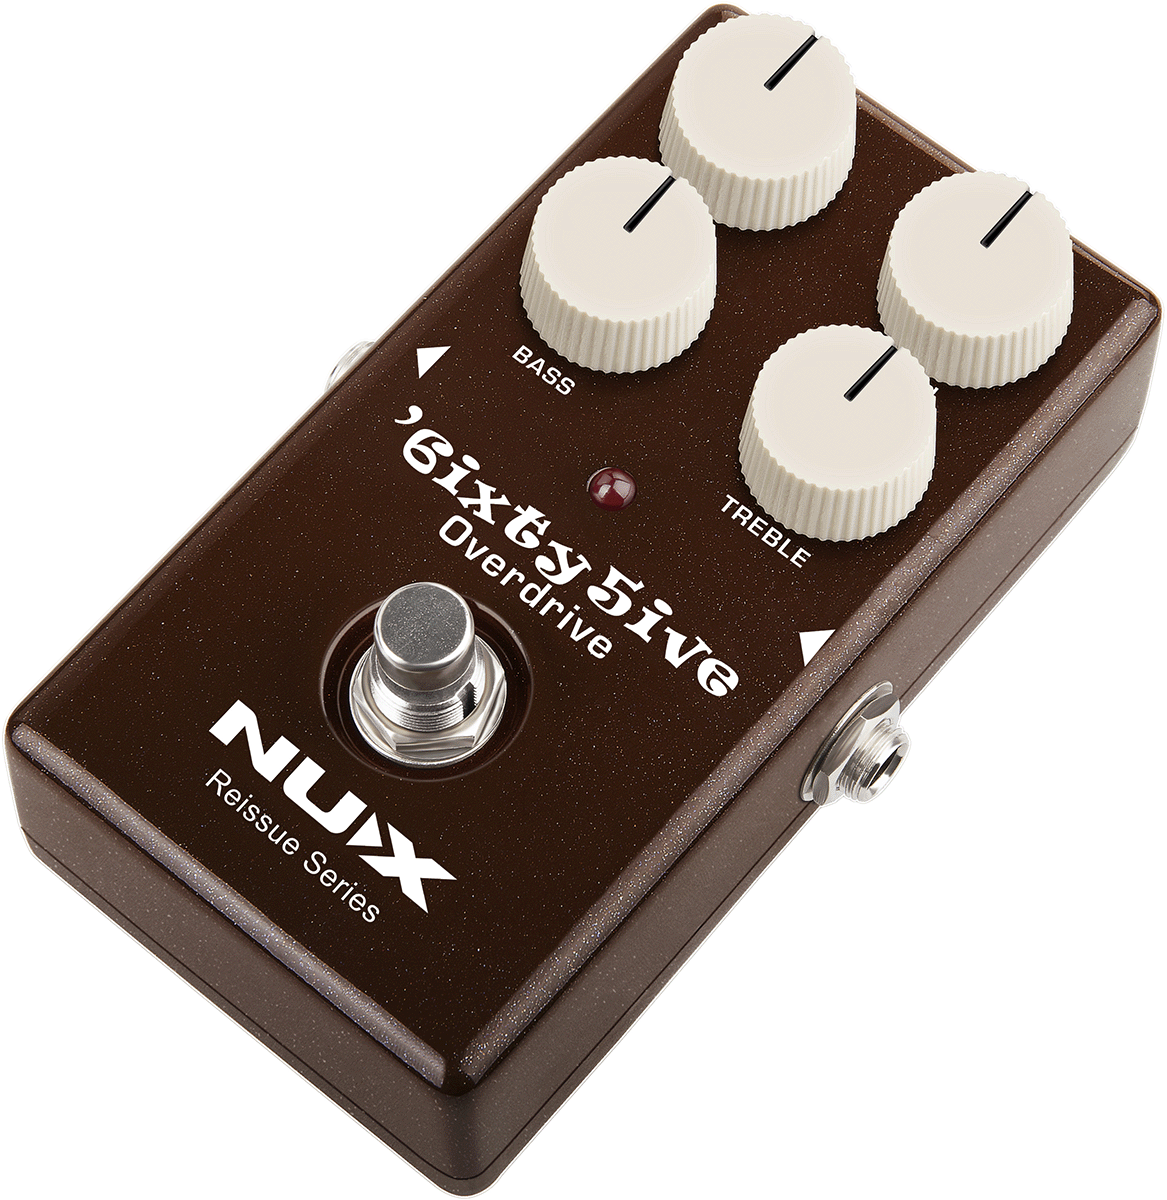 Nux Sixty Five Overdrive - Overdrive, distortion & fuzz effect pedal - Variation 1